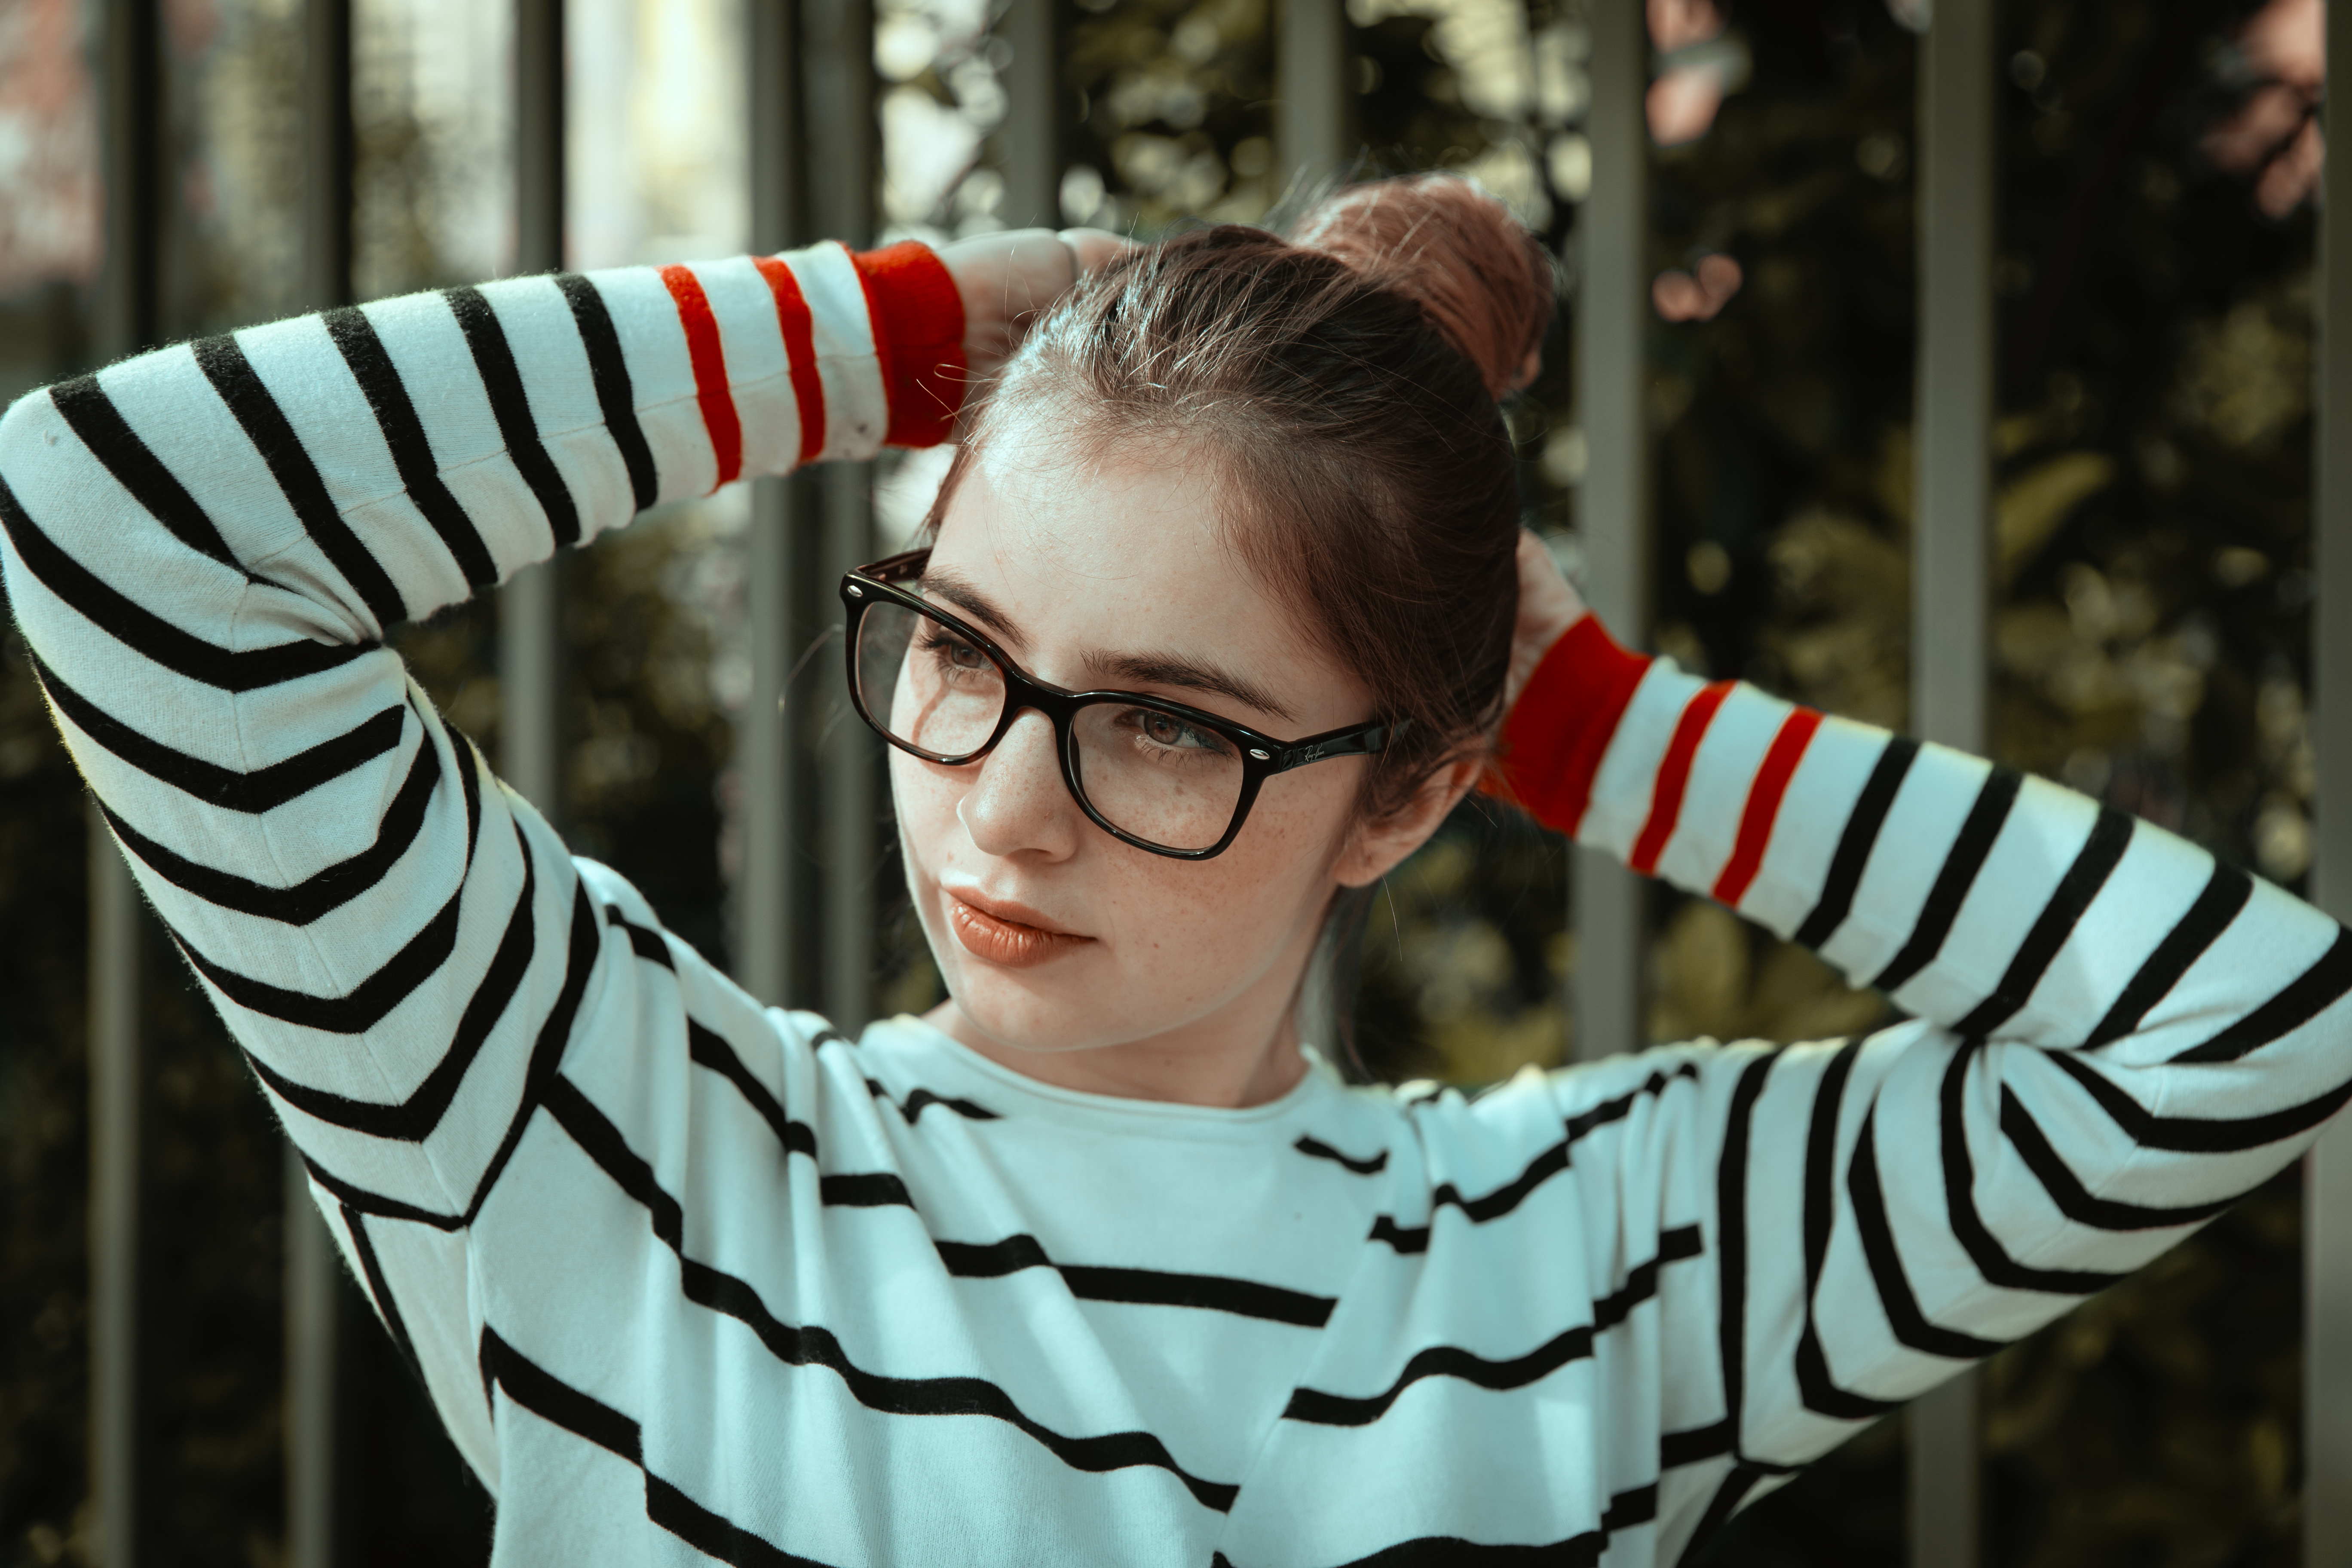 Women Women With Glasses Looking Away Striped Clothing Freckles 5472x3648